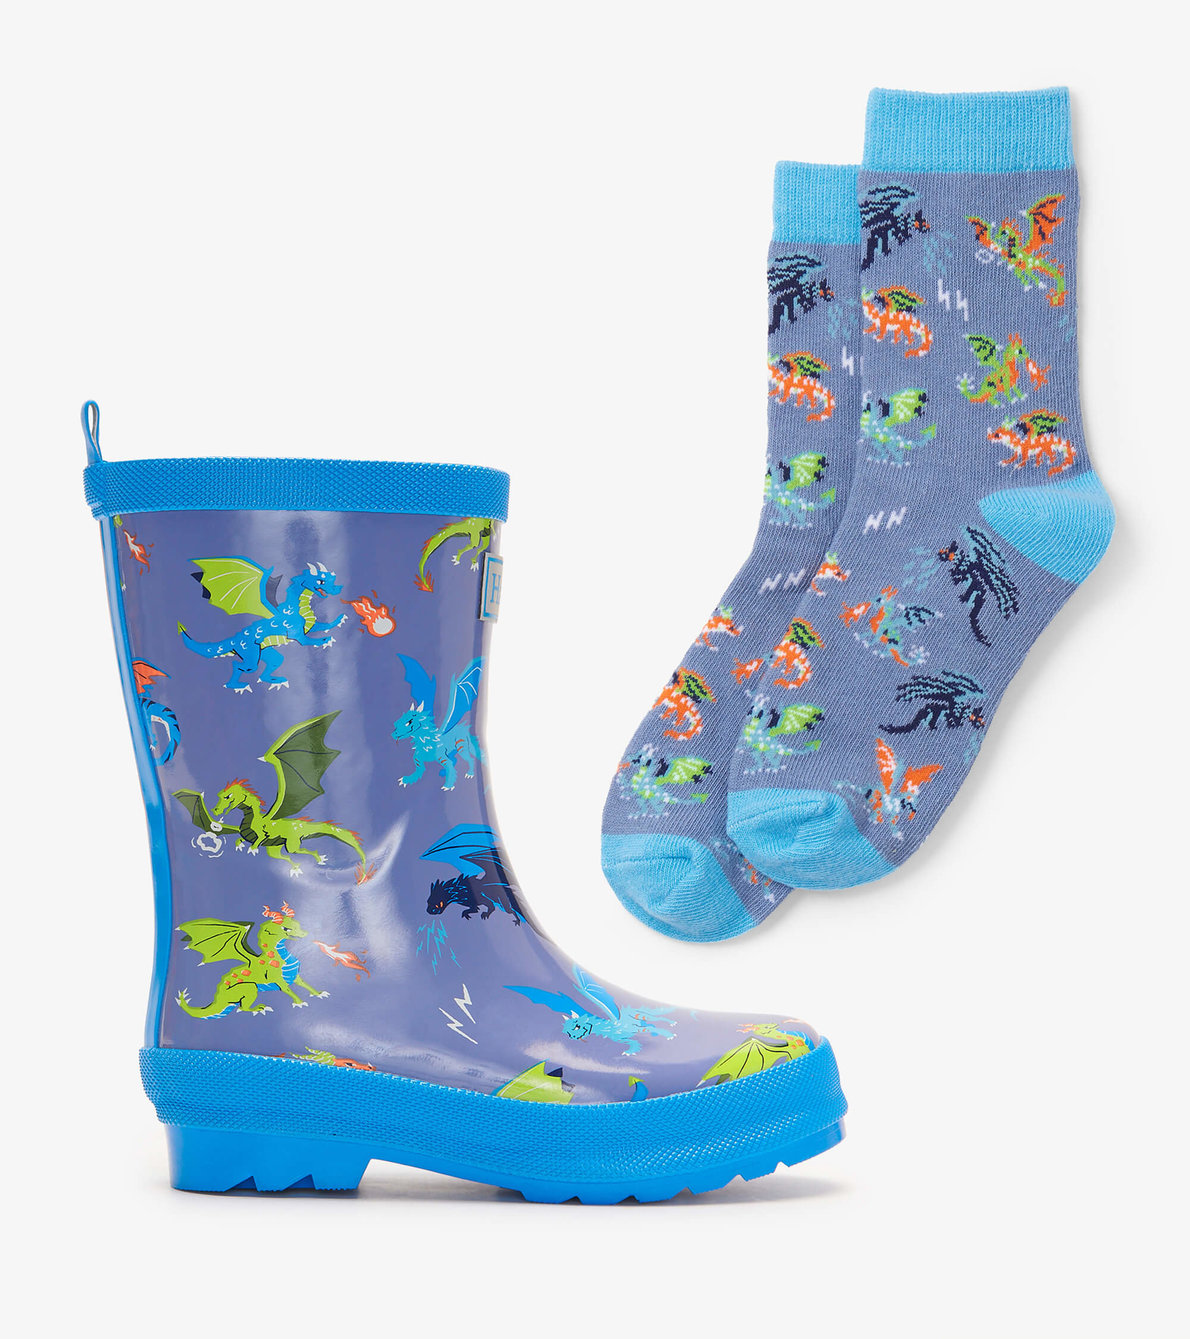 View larger image of Dragon Realm Shiny Kids Wellies